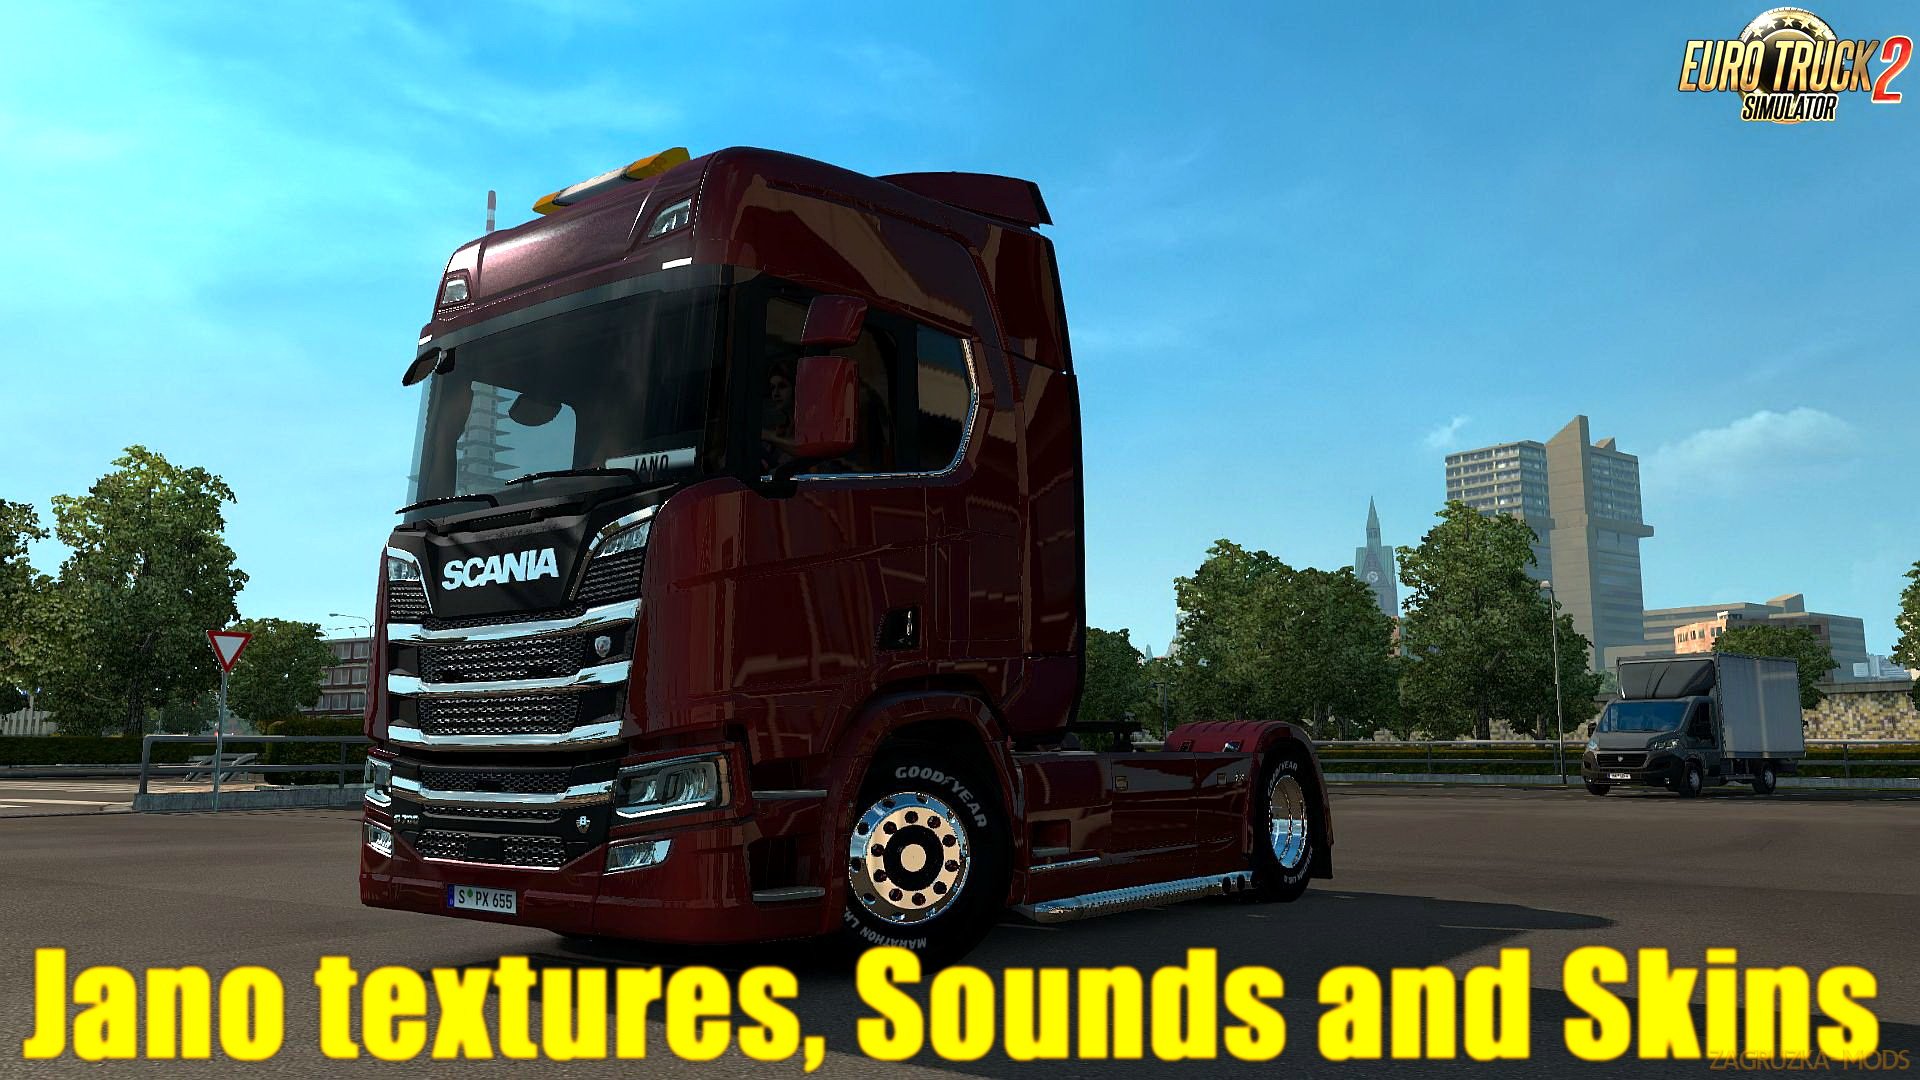 Jano textures, Sounds and Skins v2.0.5 (1.30.x) for ETS 2